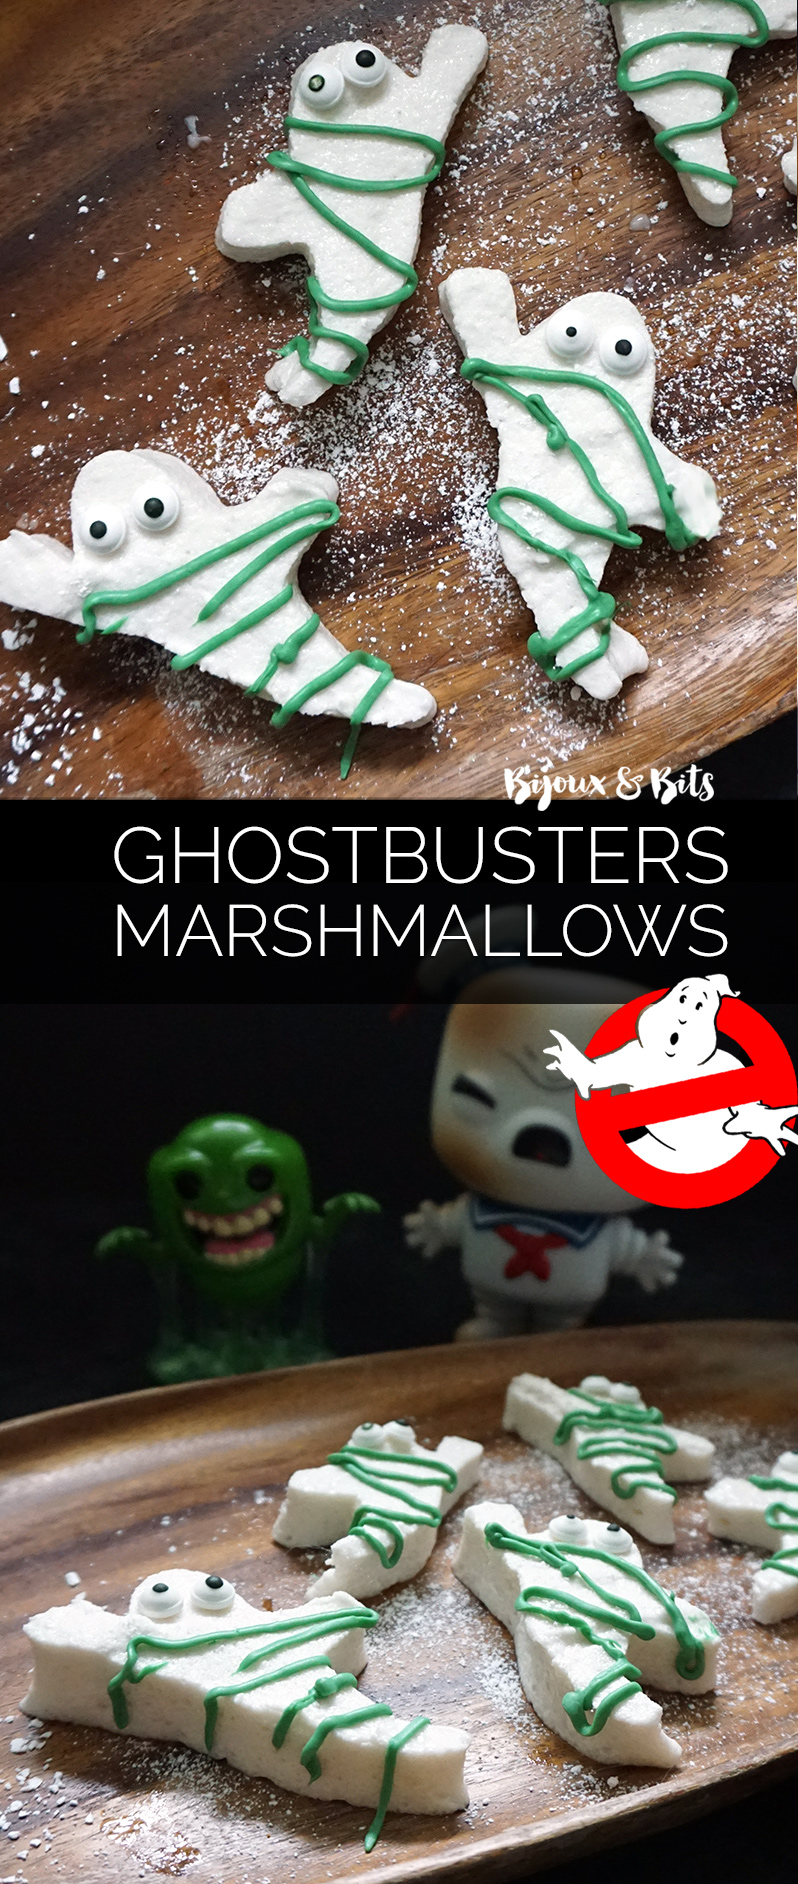 Ghostbusters marshmallows recipe from @bijouxandbits #ghostbusters #marshmallows 